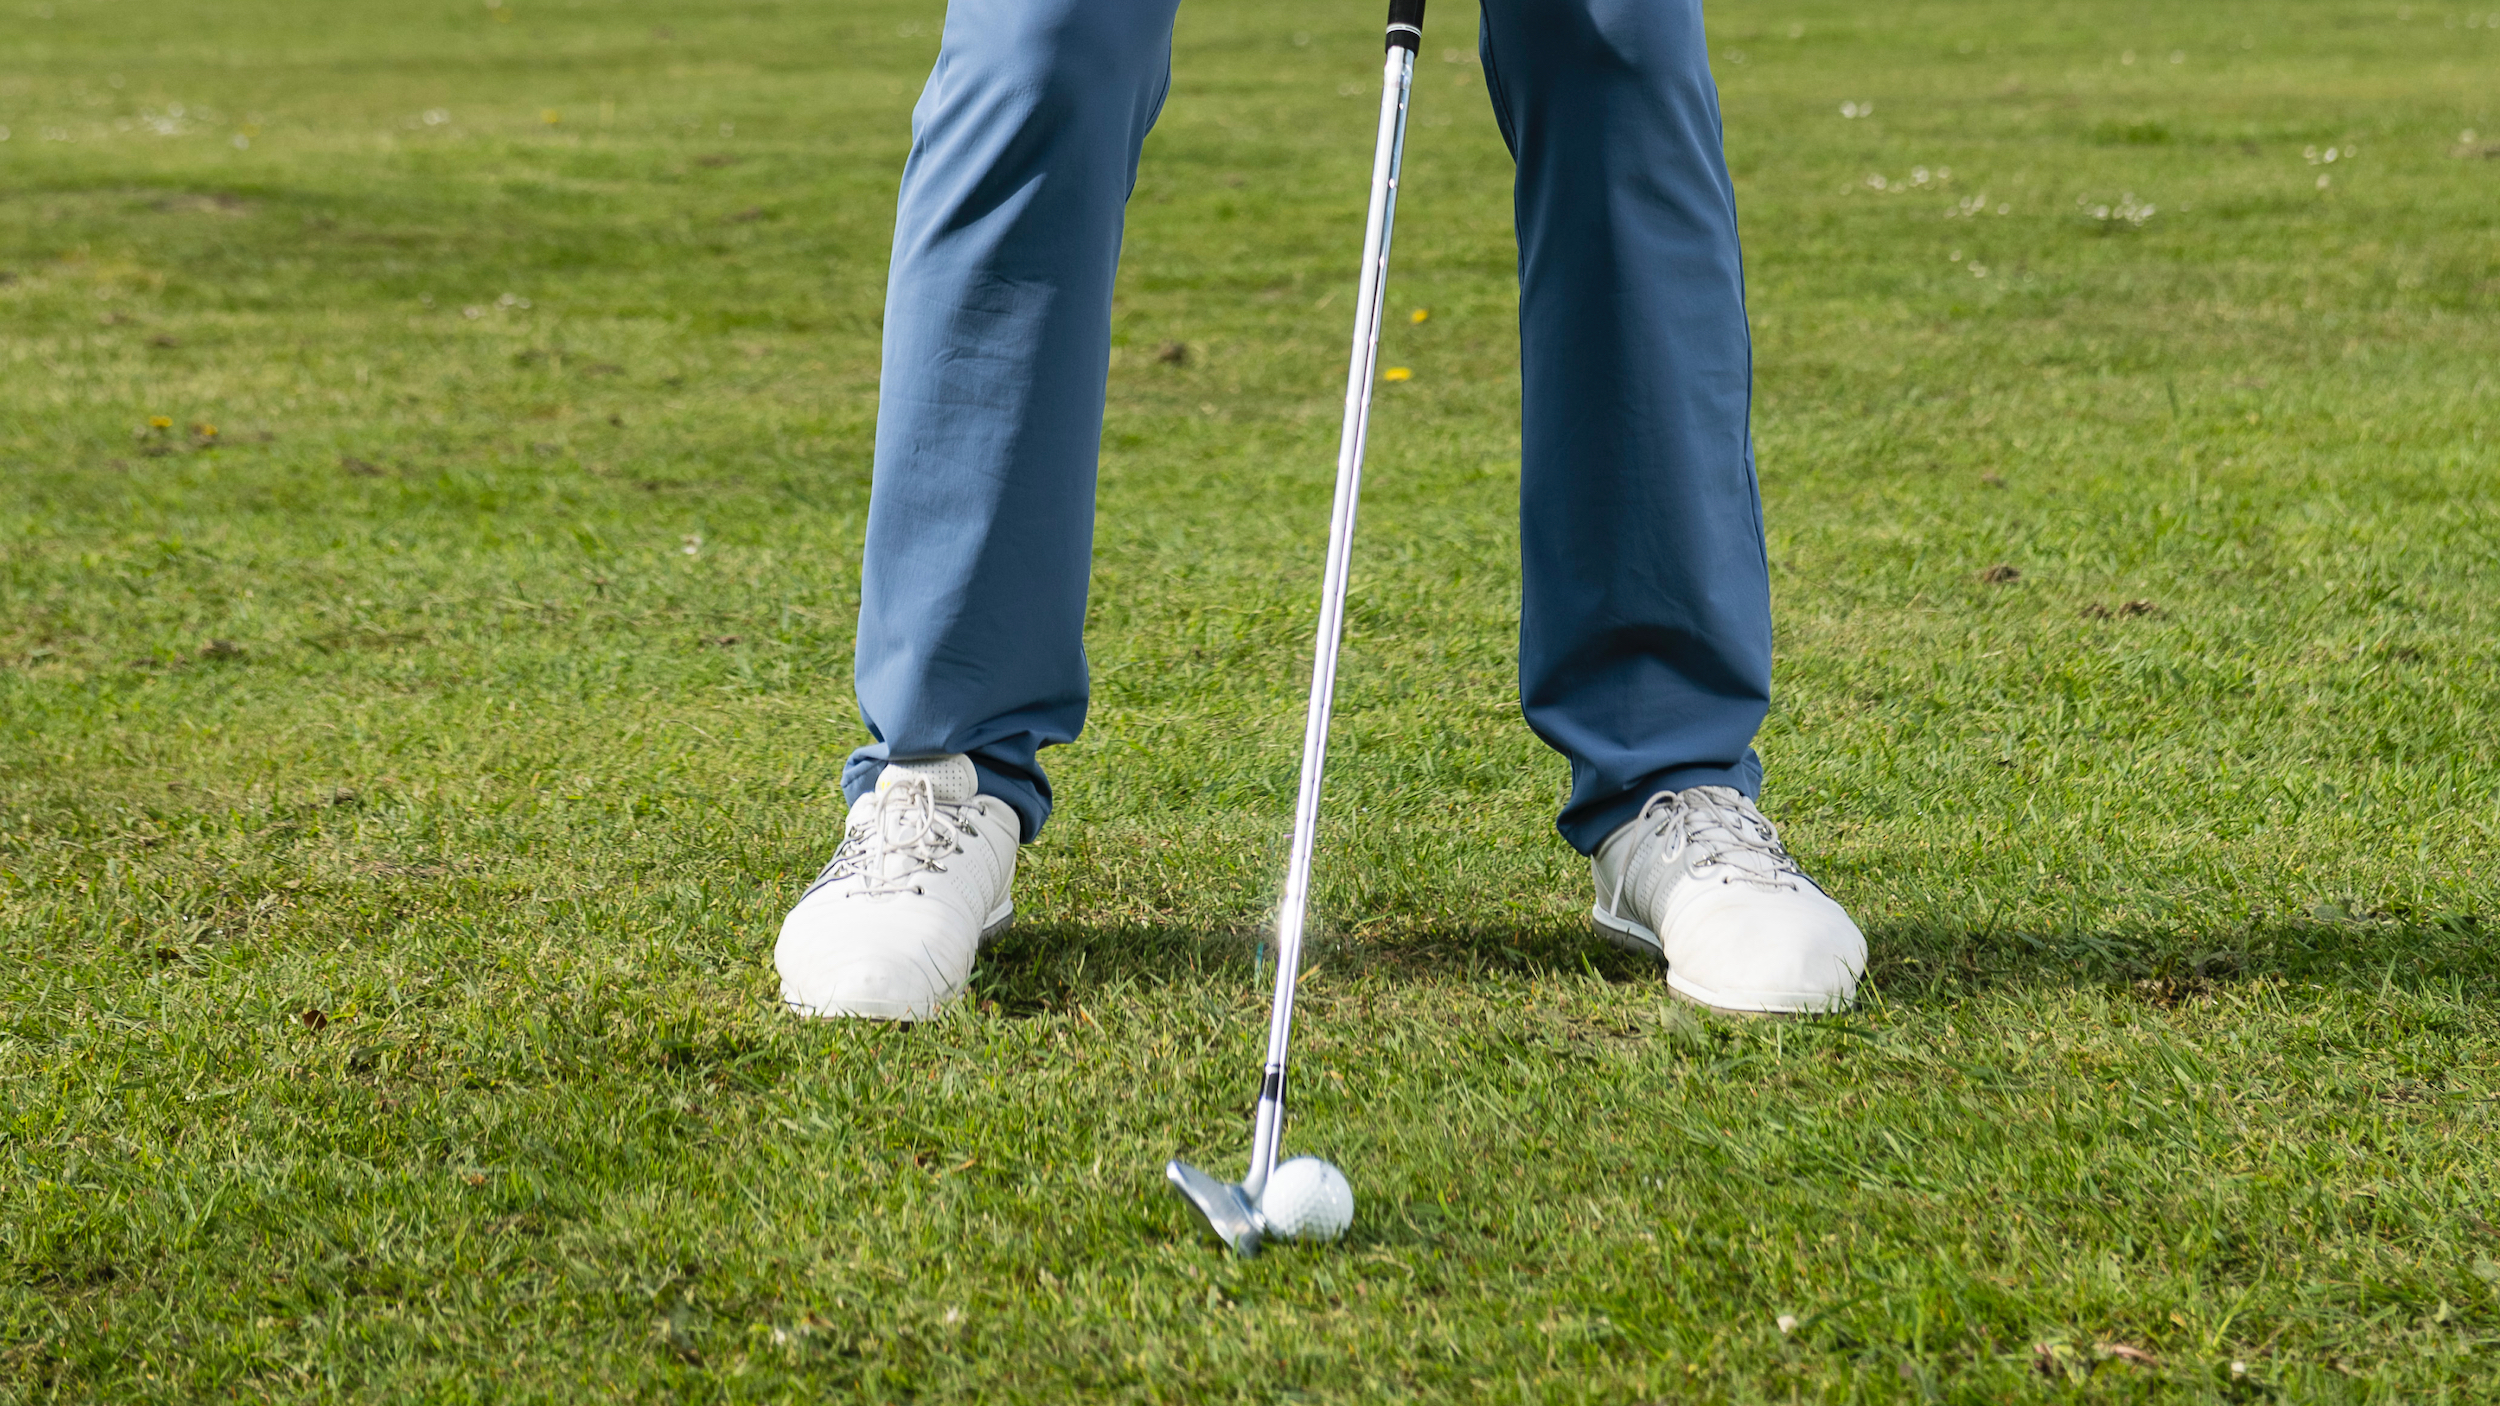 How to hit an iron - ball position short iron